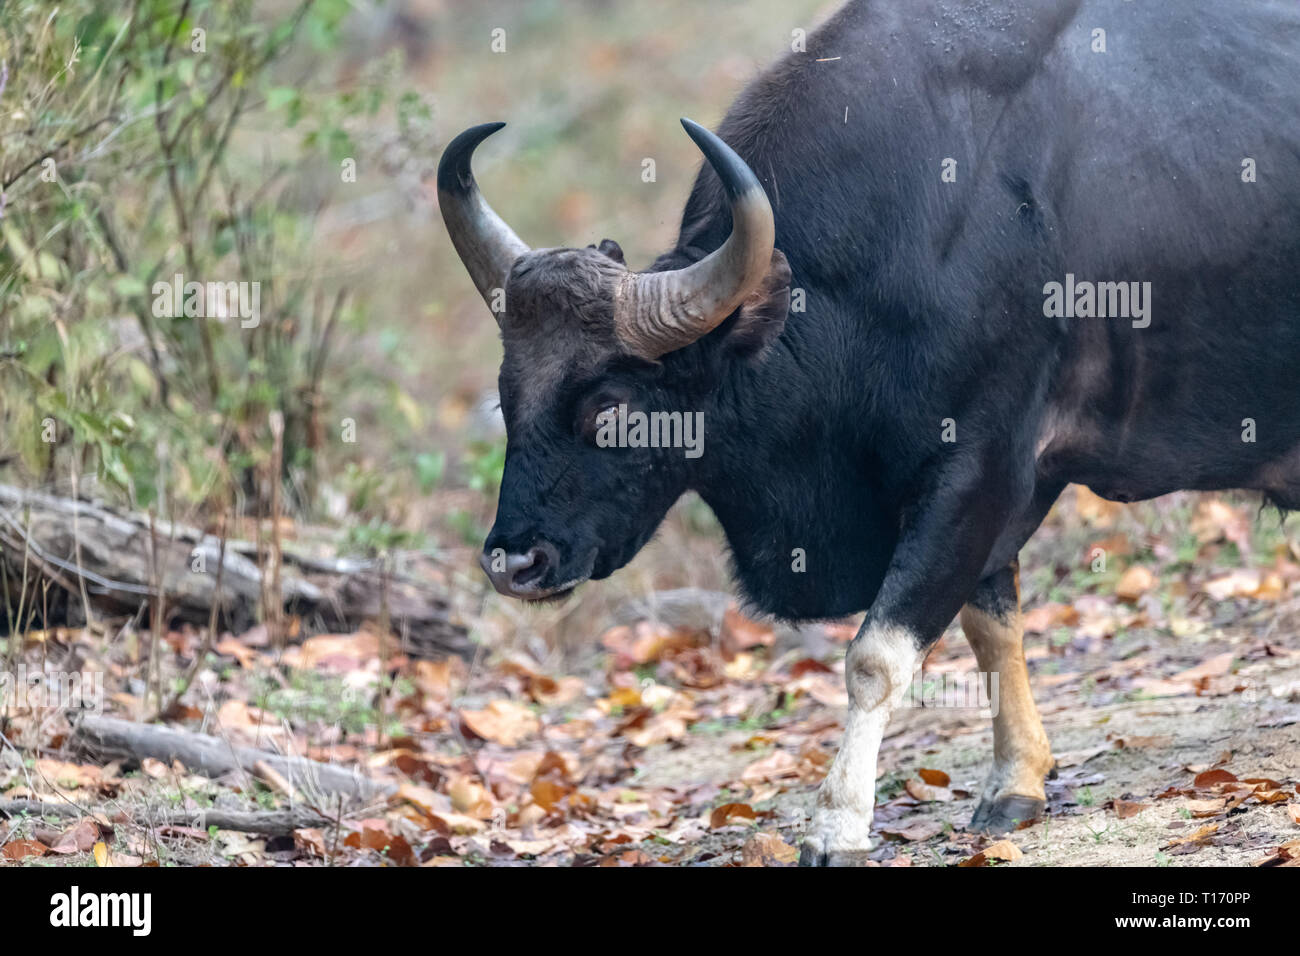 Gaur Bos Gaurus Is Also Known As The Indian Bison And Is Considered Sacred And Also Vulnerable On The Iucn Red List Stock Photo Alamy